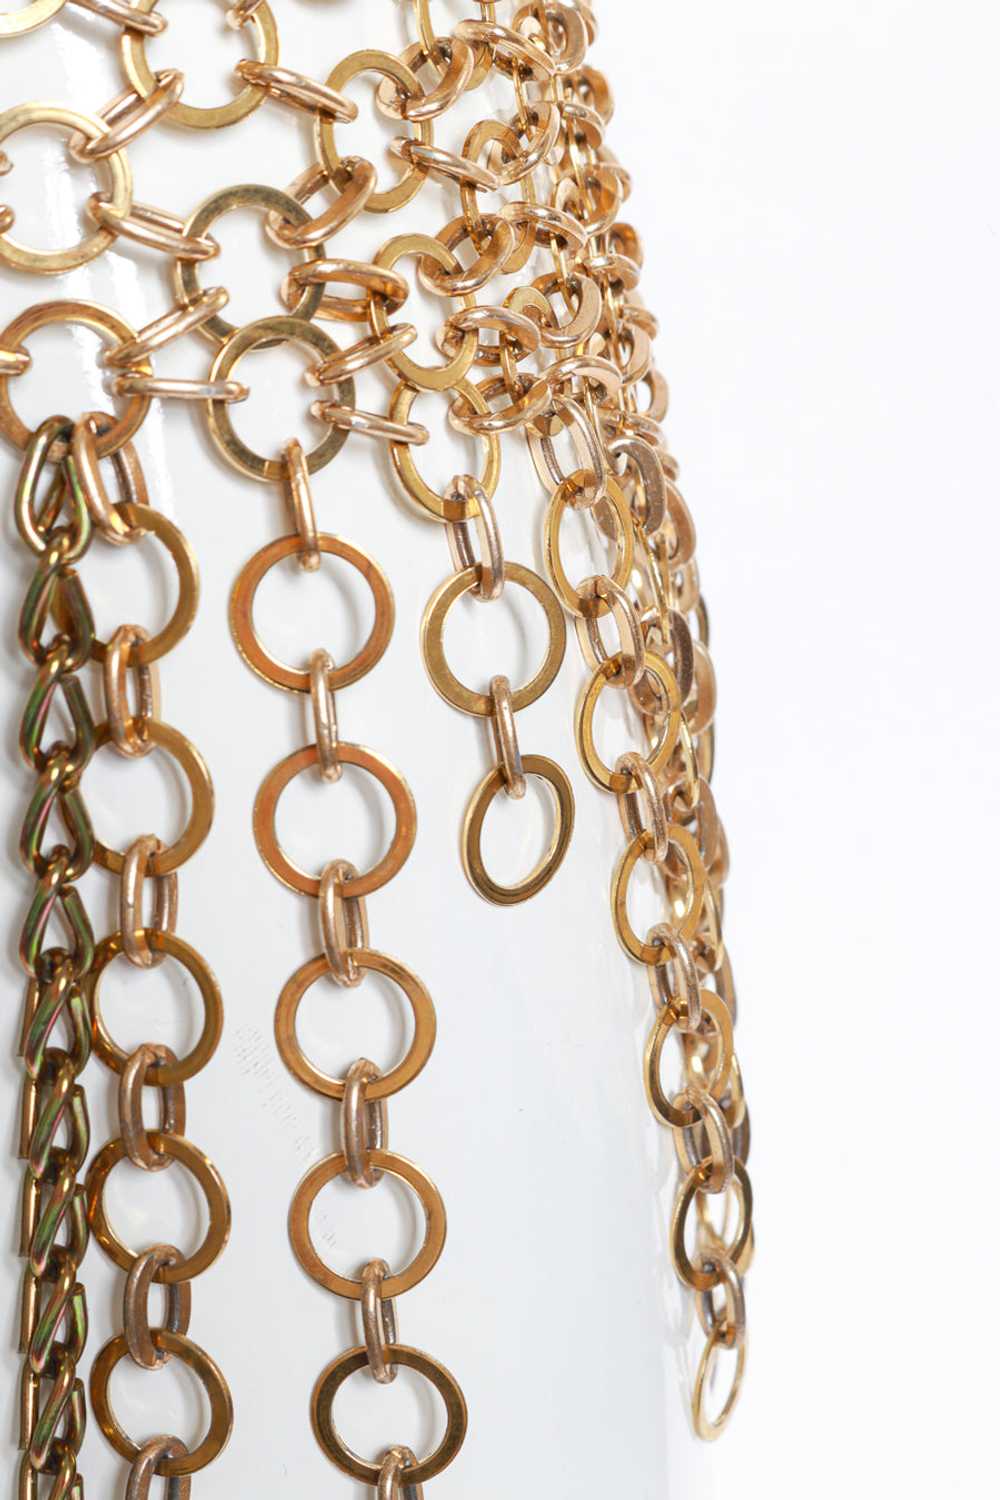 Ring Link Chain Dress - image 9